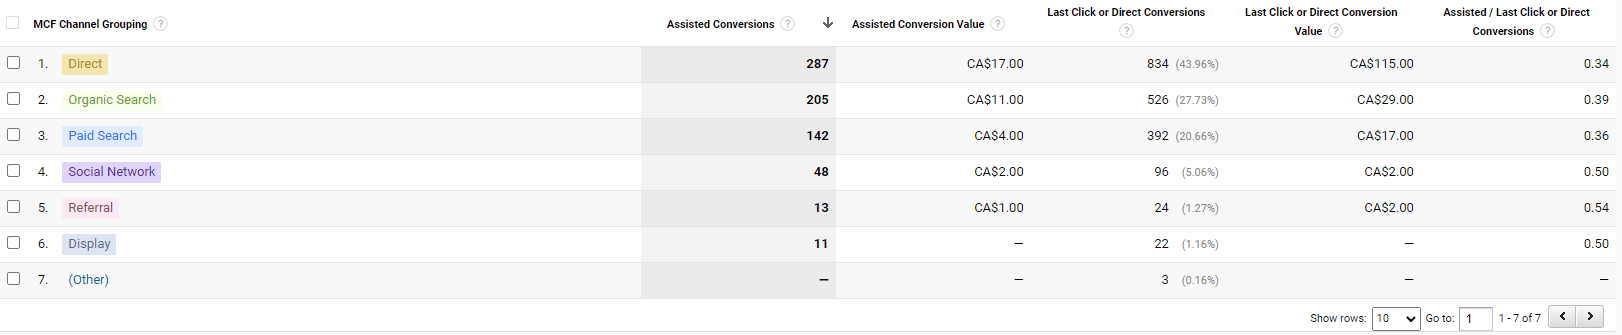 google analytics assisted conversions view